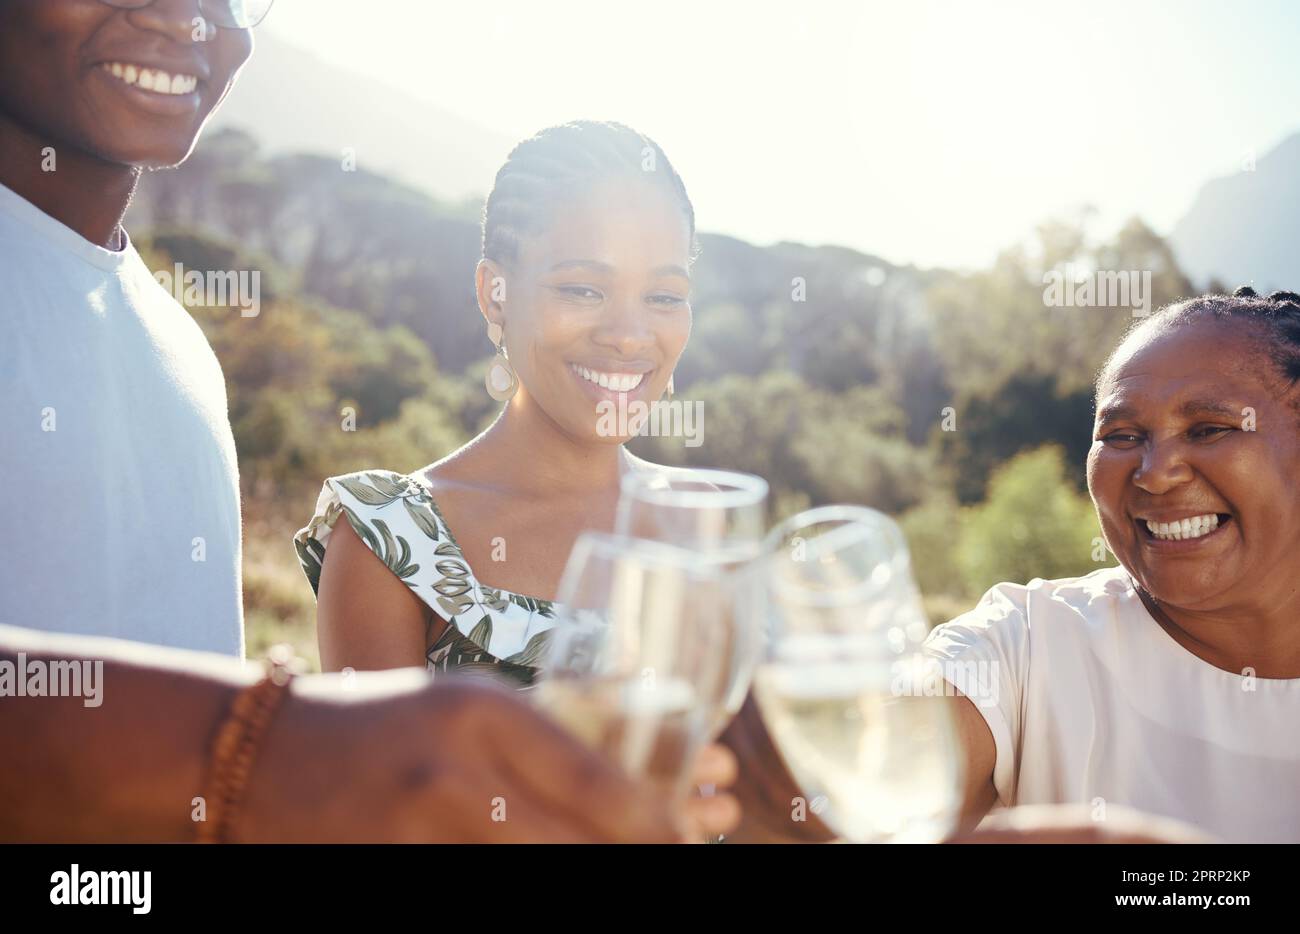 Vineyard celebration, wine or champagne glasses with family at an outdoor social event, picnic or park celebrating love, success and joy. Happy lifestyle of black people and women cheers with drinks Stock Photo